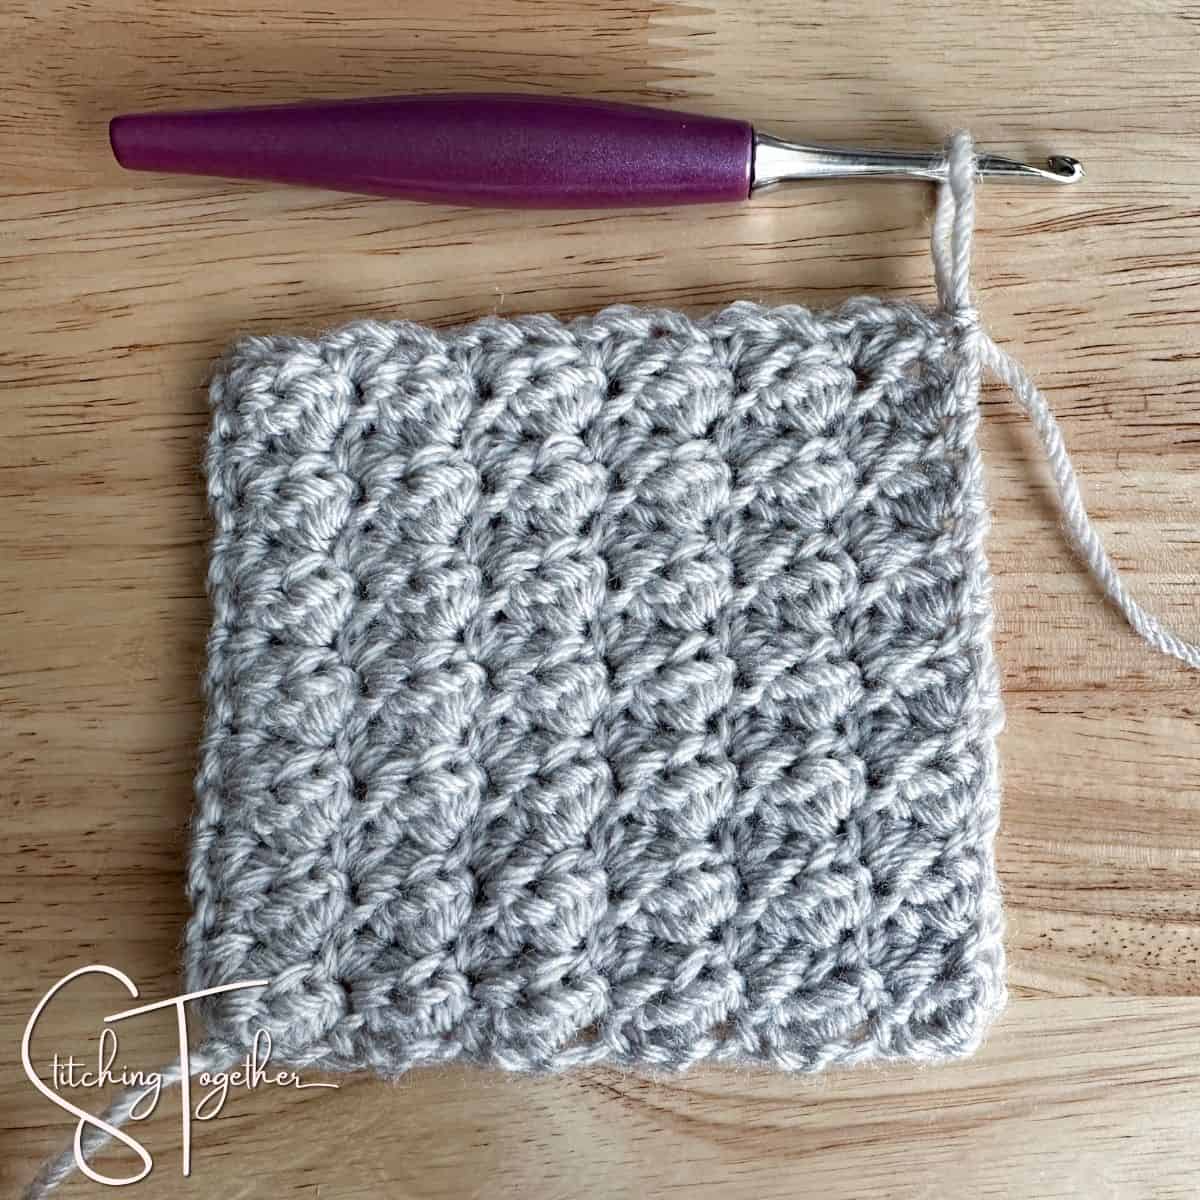 completed swatch of the crochet sedge stitch